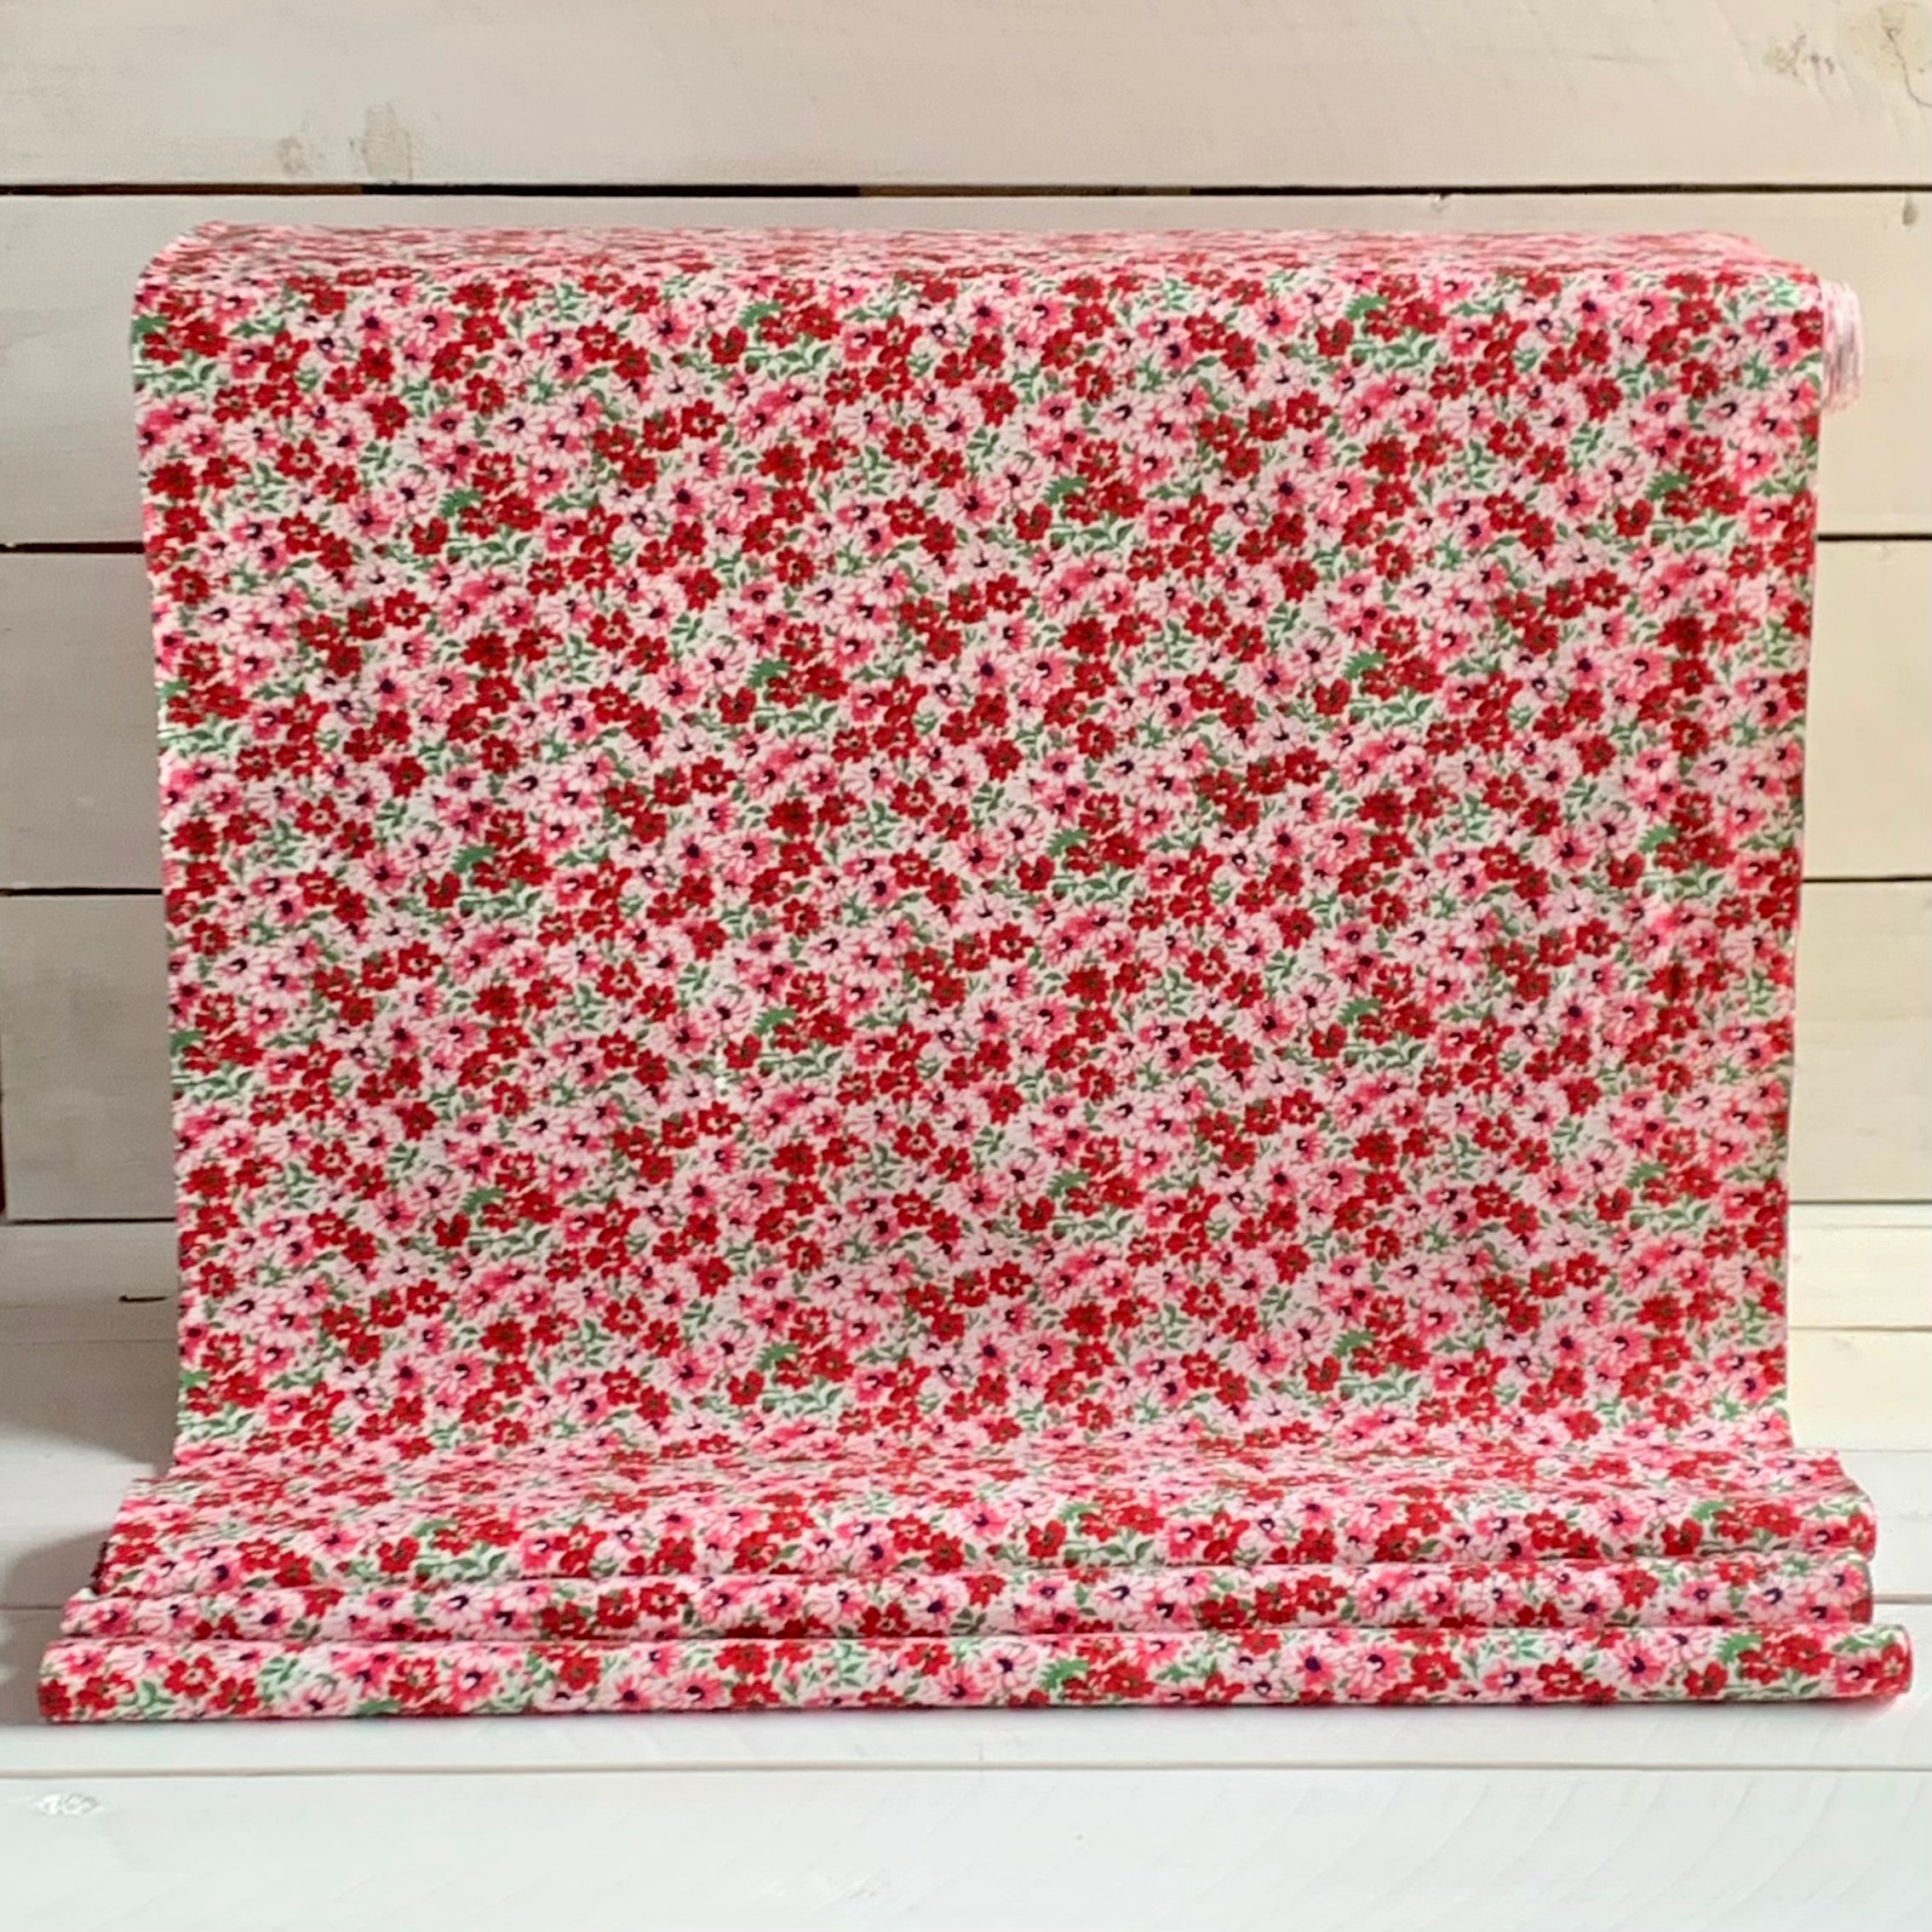 Reproduction Feed Sack Floral Fabric - Red, Yellow, Purple, Navy, Aqua, Pink, Orange